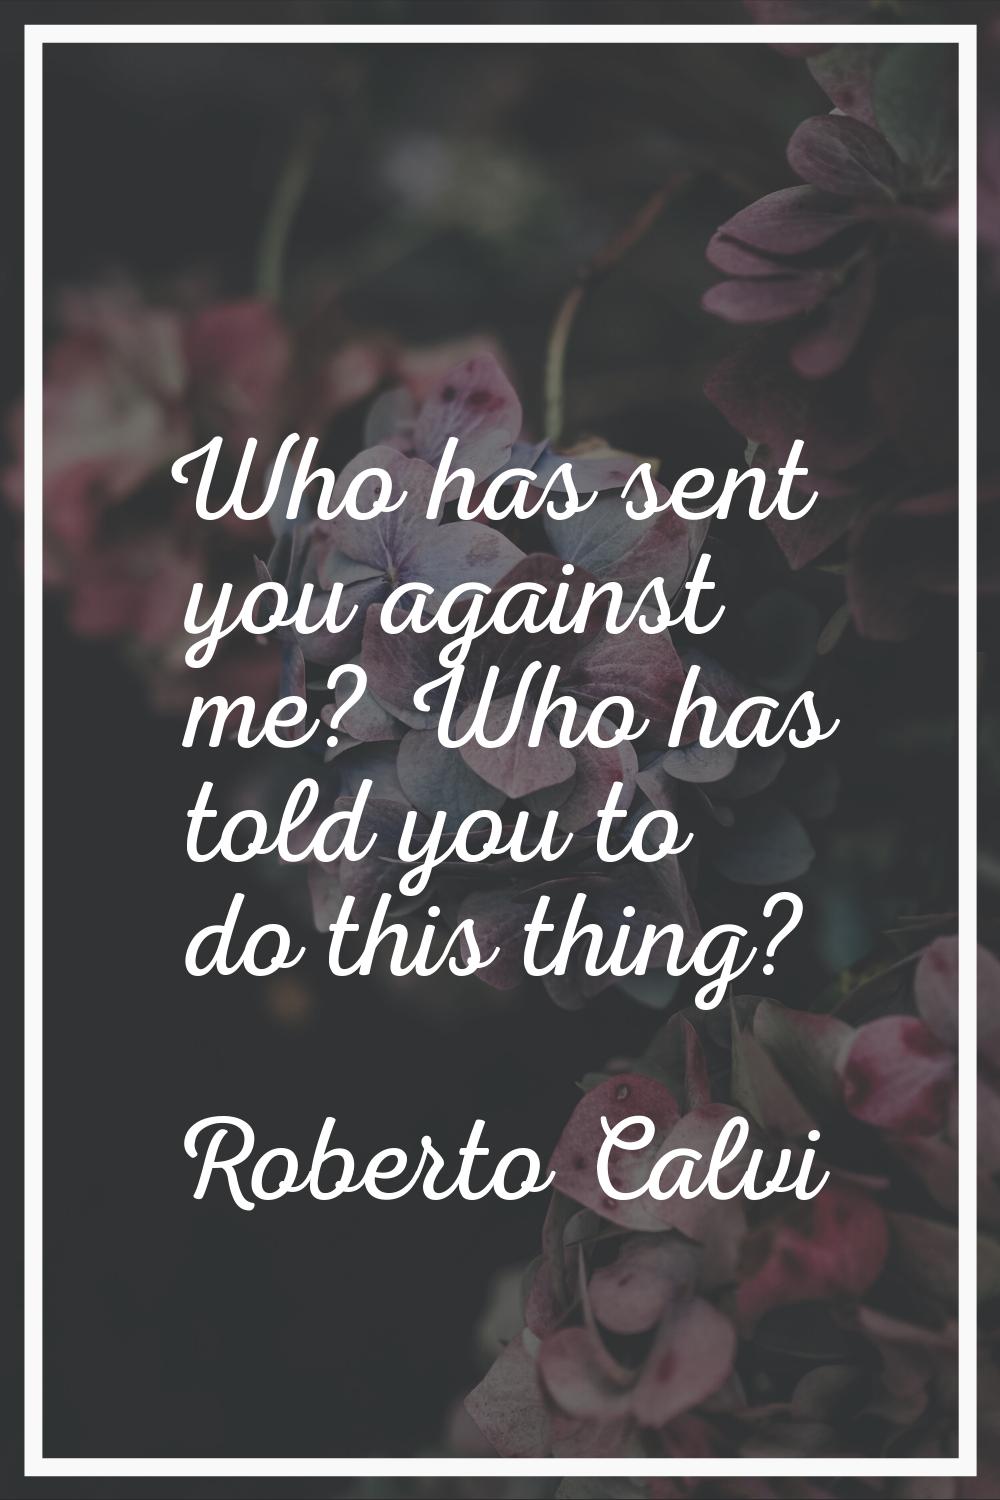 Who has sent you against me? Who has told you to do this thing?